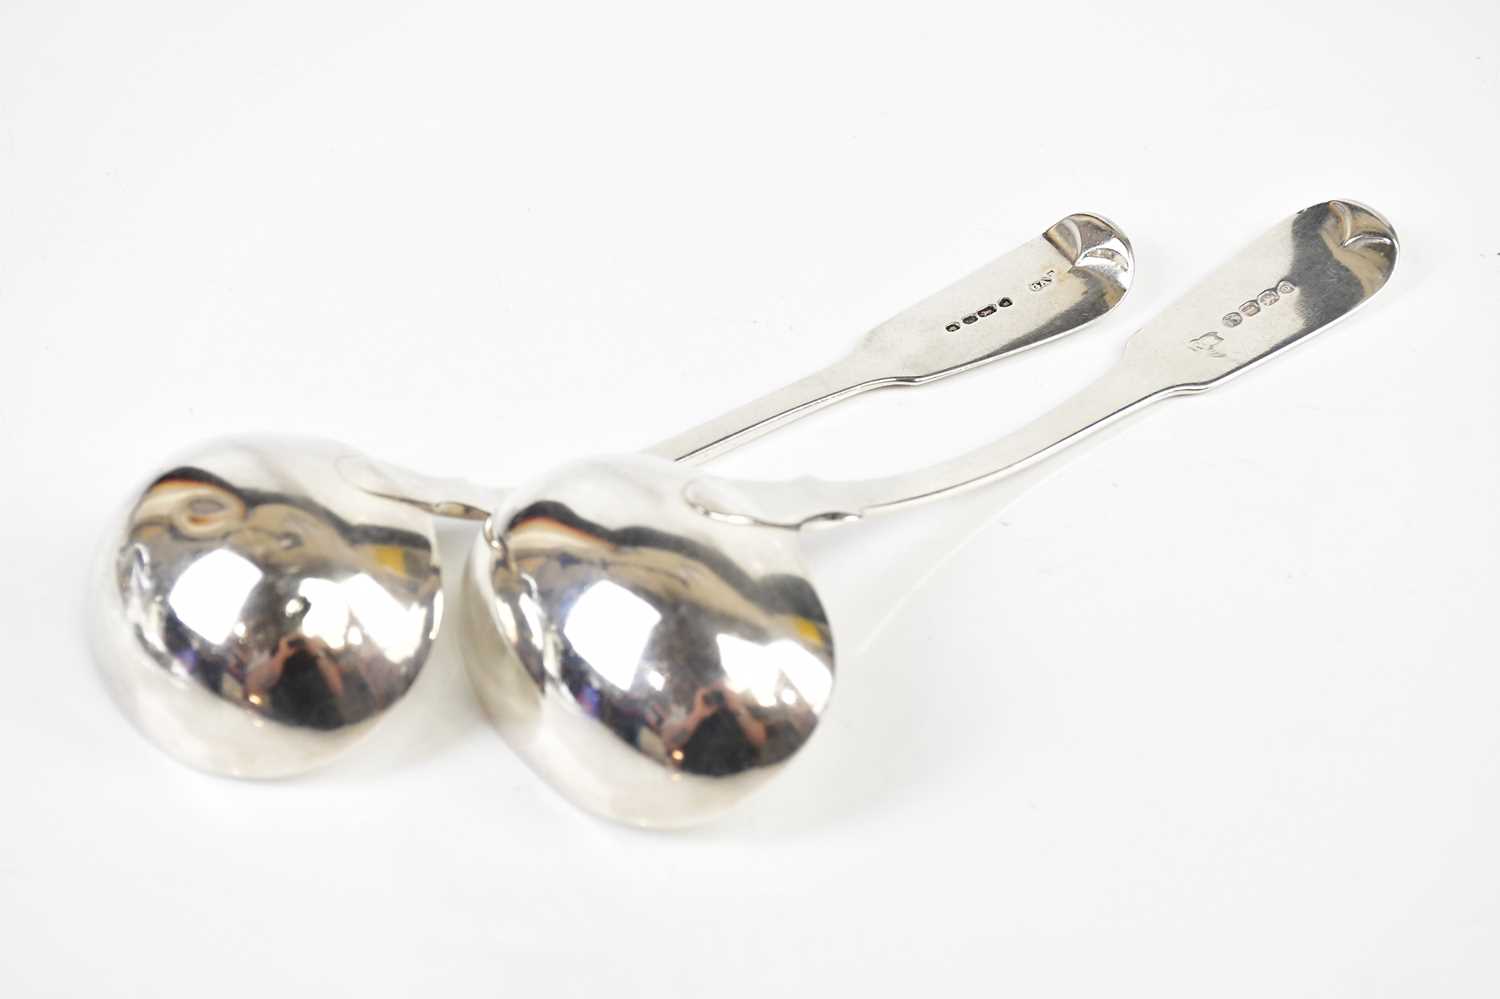 CHAWNER & CO; a Victorian hallmarked silver sauce ladle, London 1844, and a similar hallmarked - Image 3 of 3